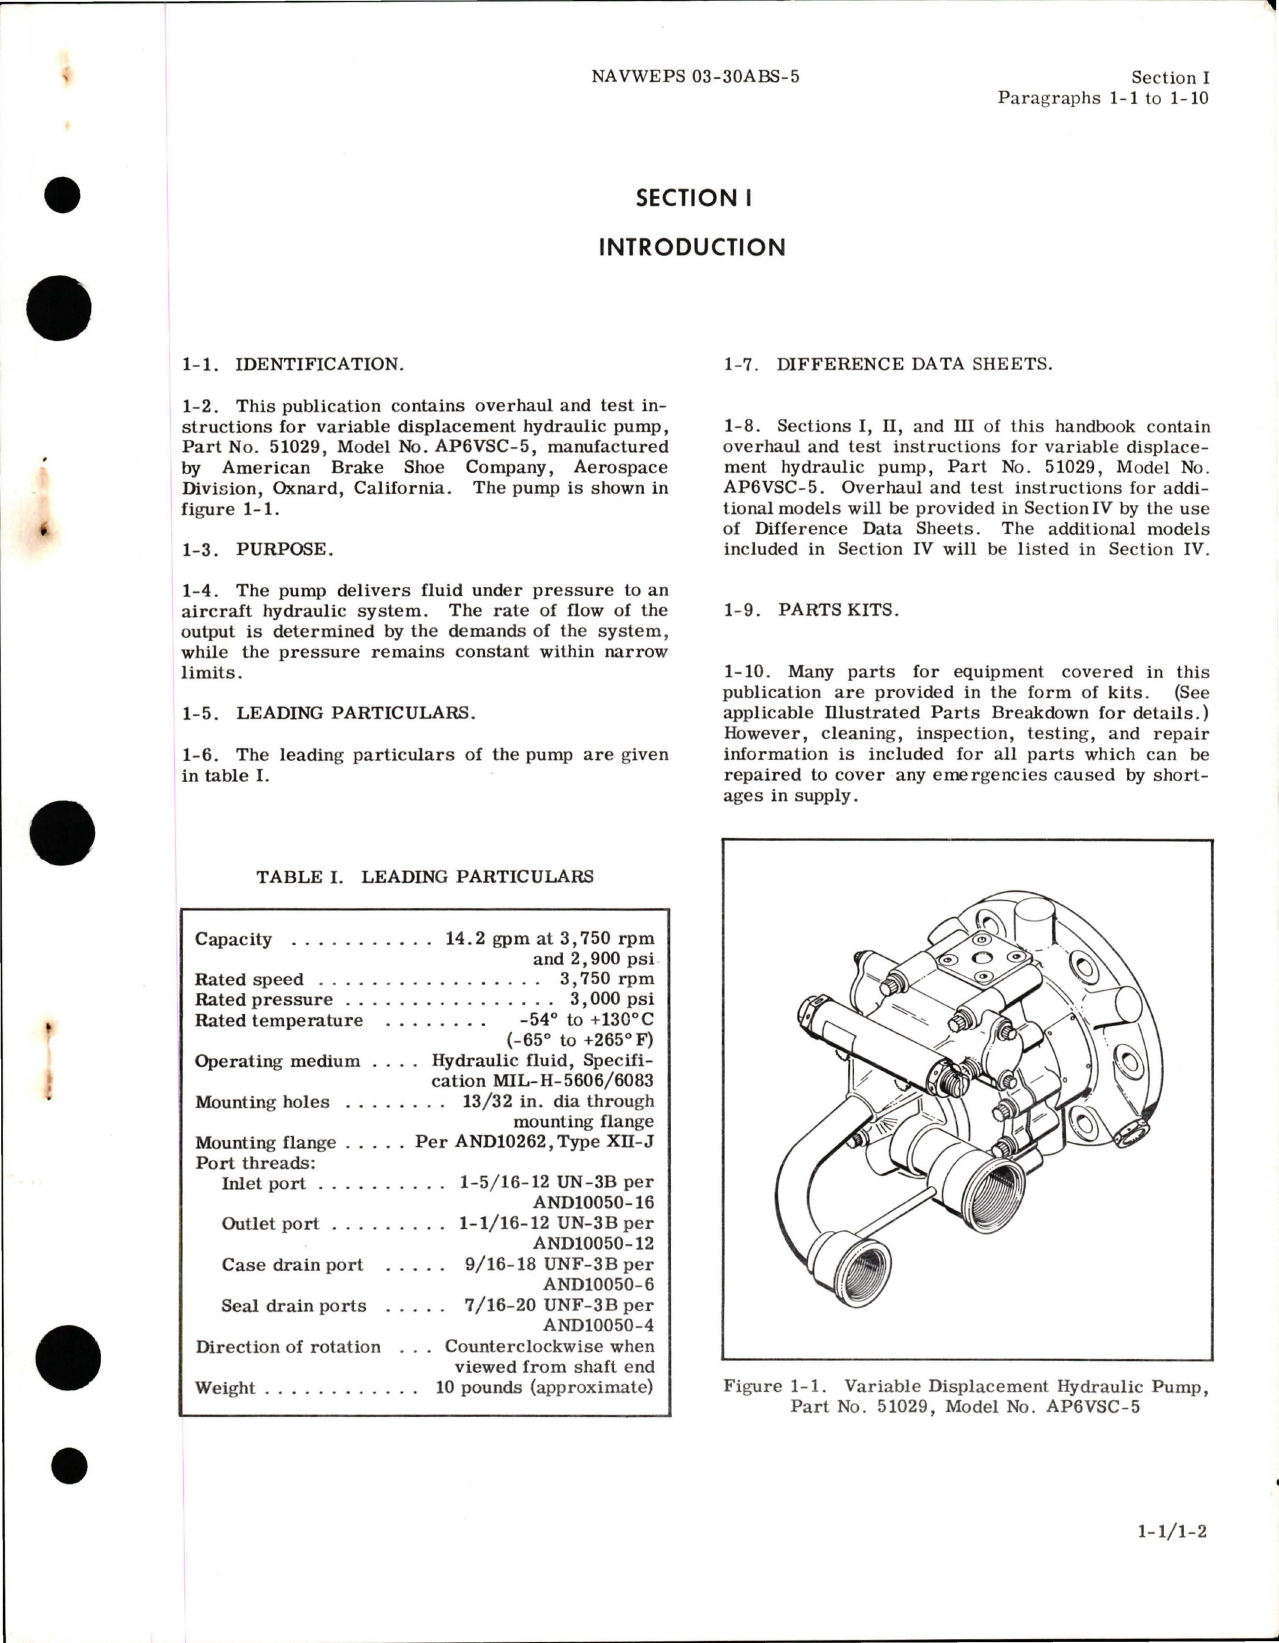 Sample page 5 from AirCorps Library document: Overhaul Instructions for Variable Displacement Hydraulic Pump - Part 51029 - Model AP6VSC-5